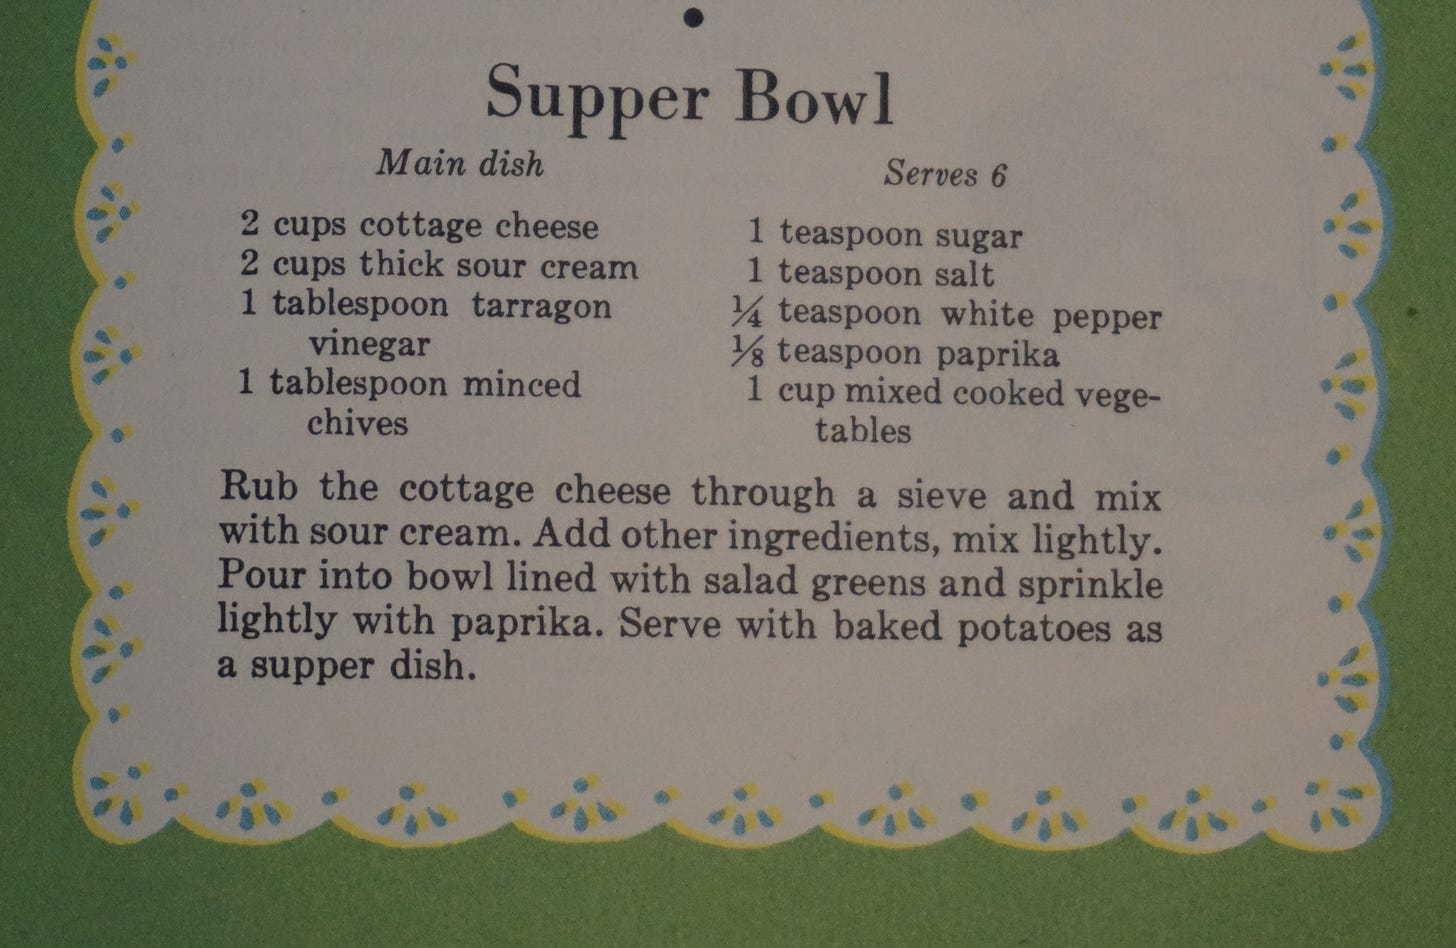 Recipe for something called "Supper Bowl" which starts by telling you to rub the cottage cheese through a sieve and then mix it with sour cream. And then a bunch of herbs and mixed cooked vegetables.